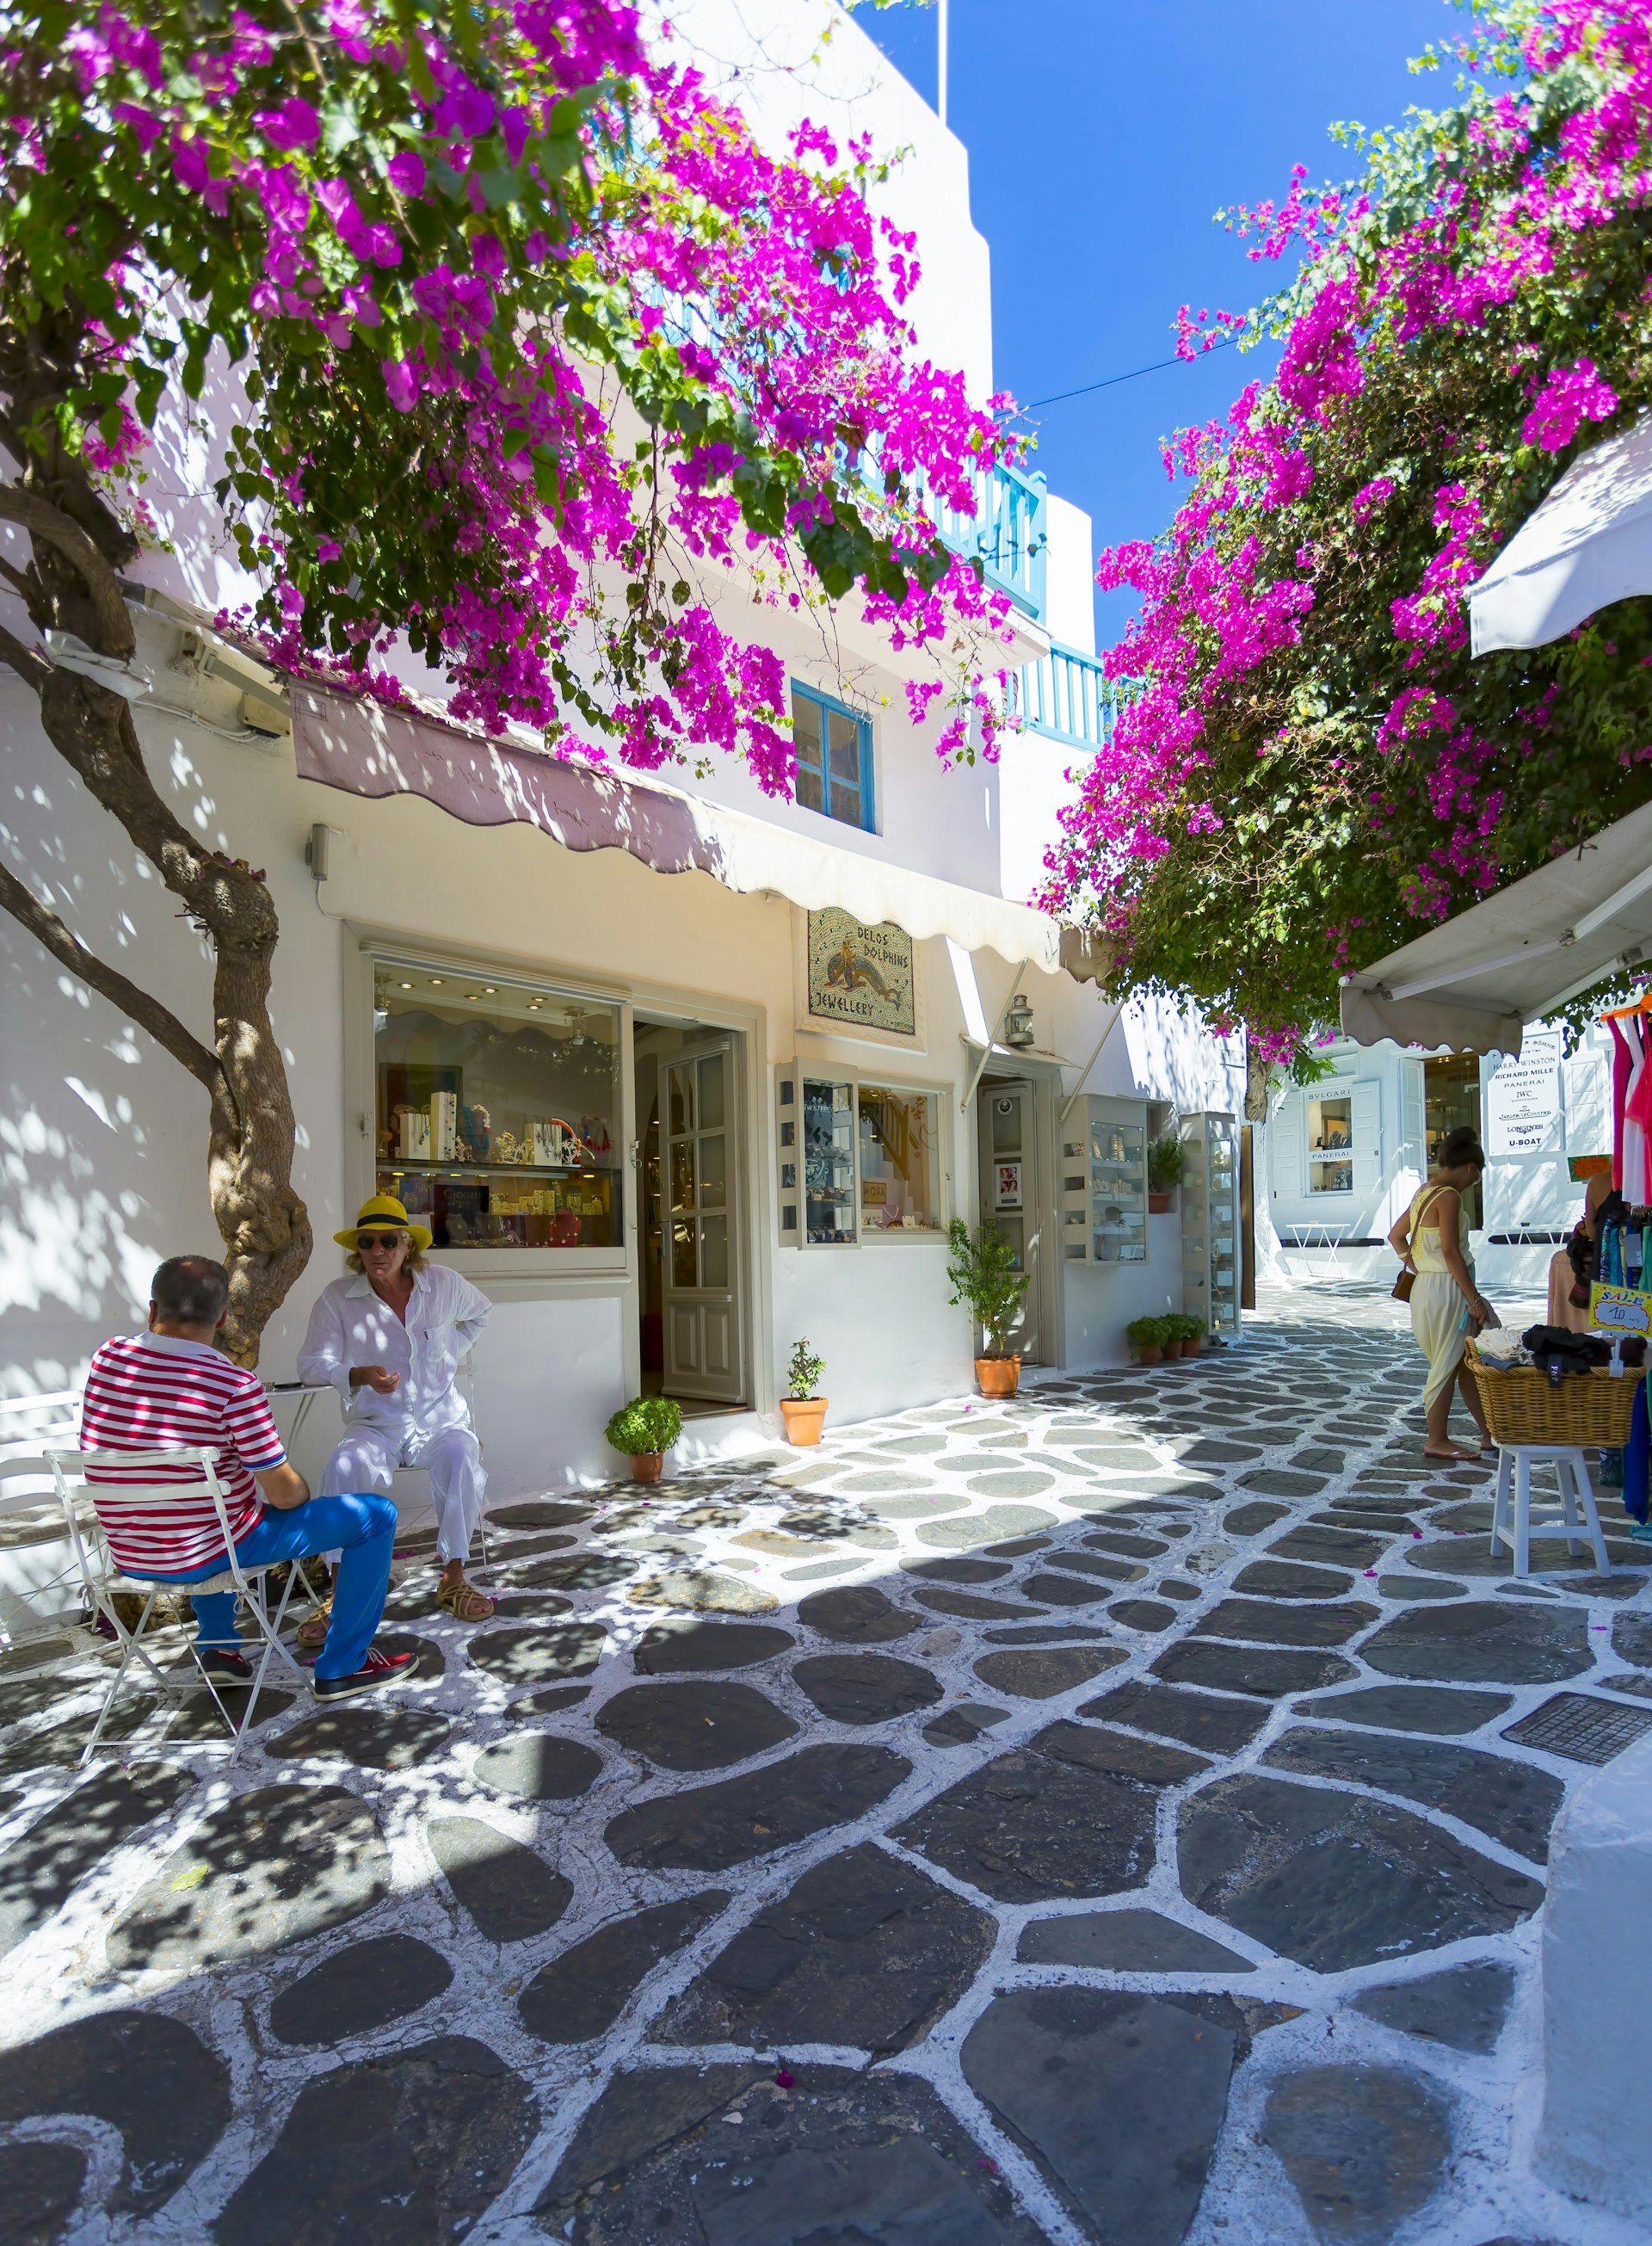 The famous Matogianni street, the most well known street in Mykonos island,